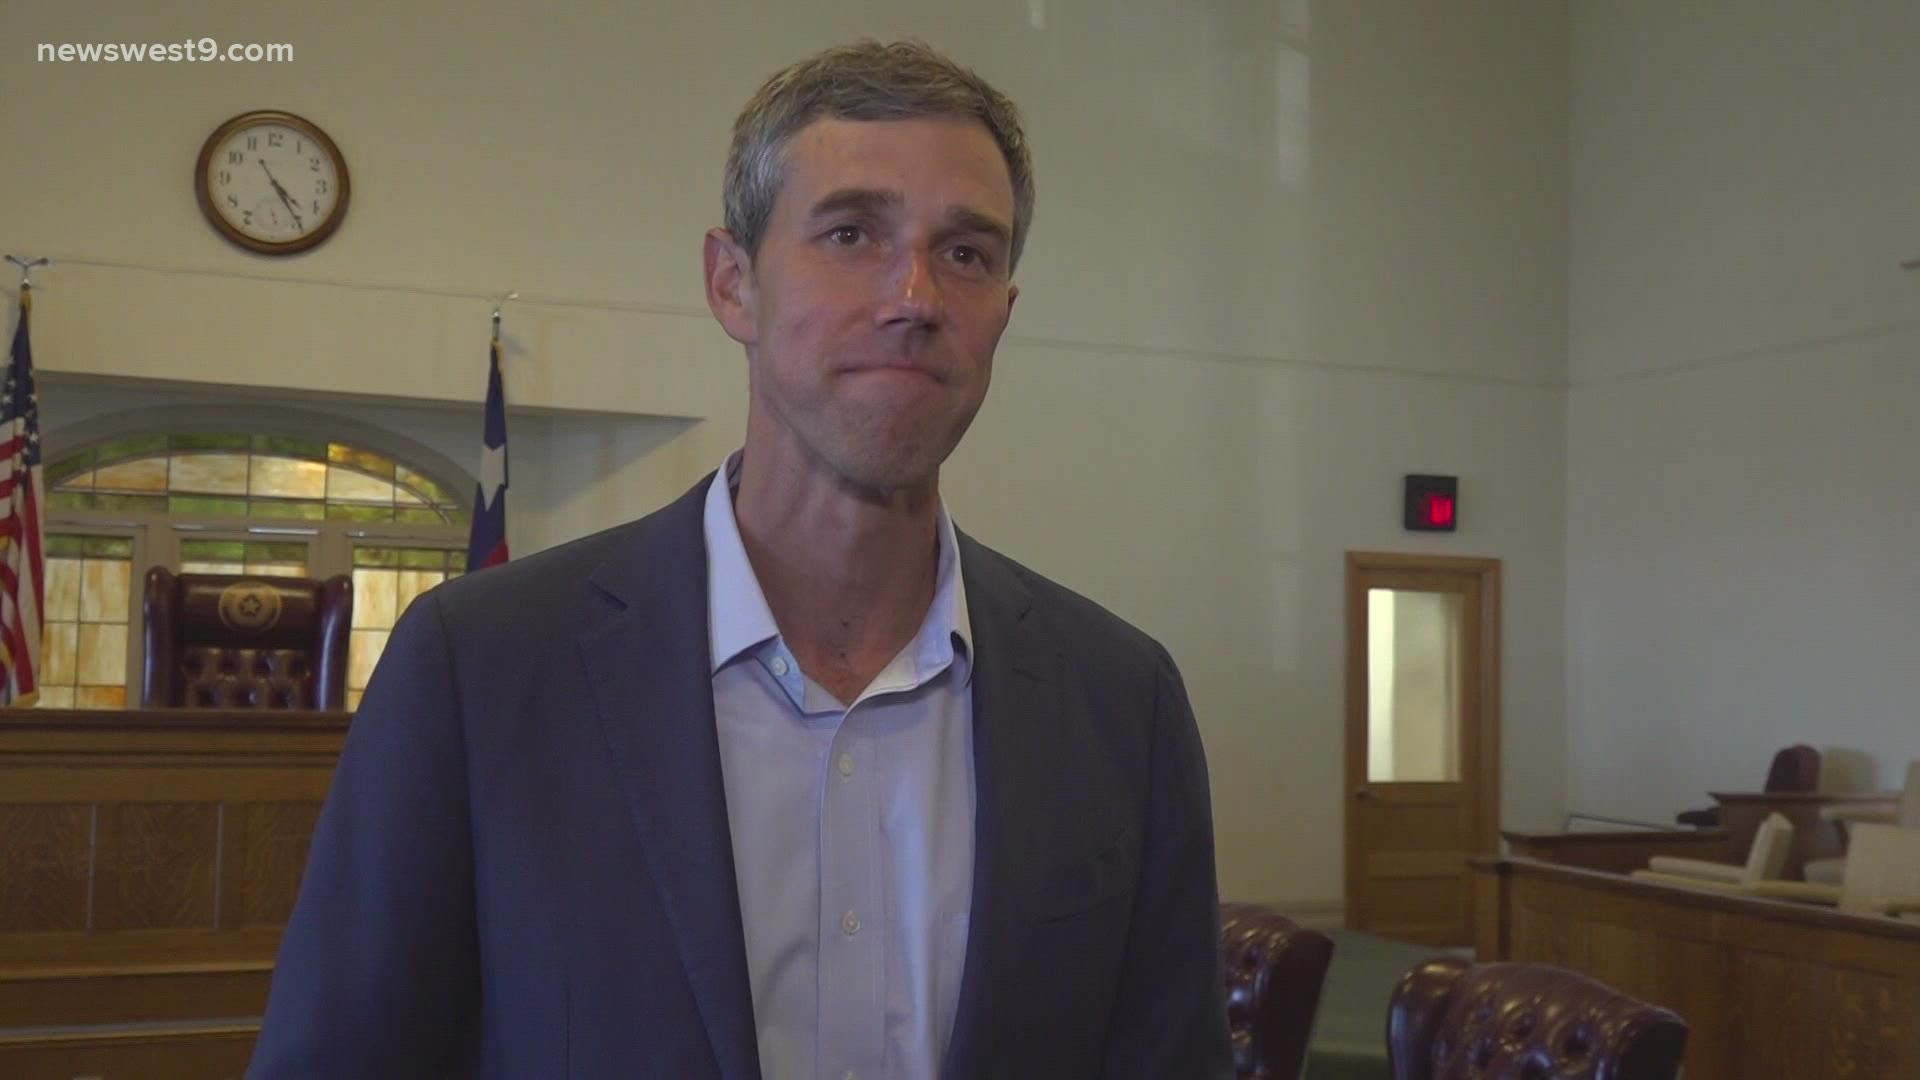 O'Rourke visited Fort Stockton to discuss some of the challenges health care officials face in the area.